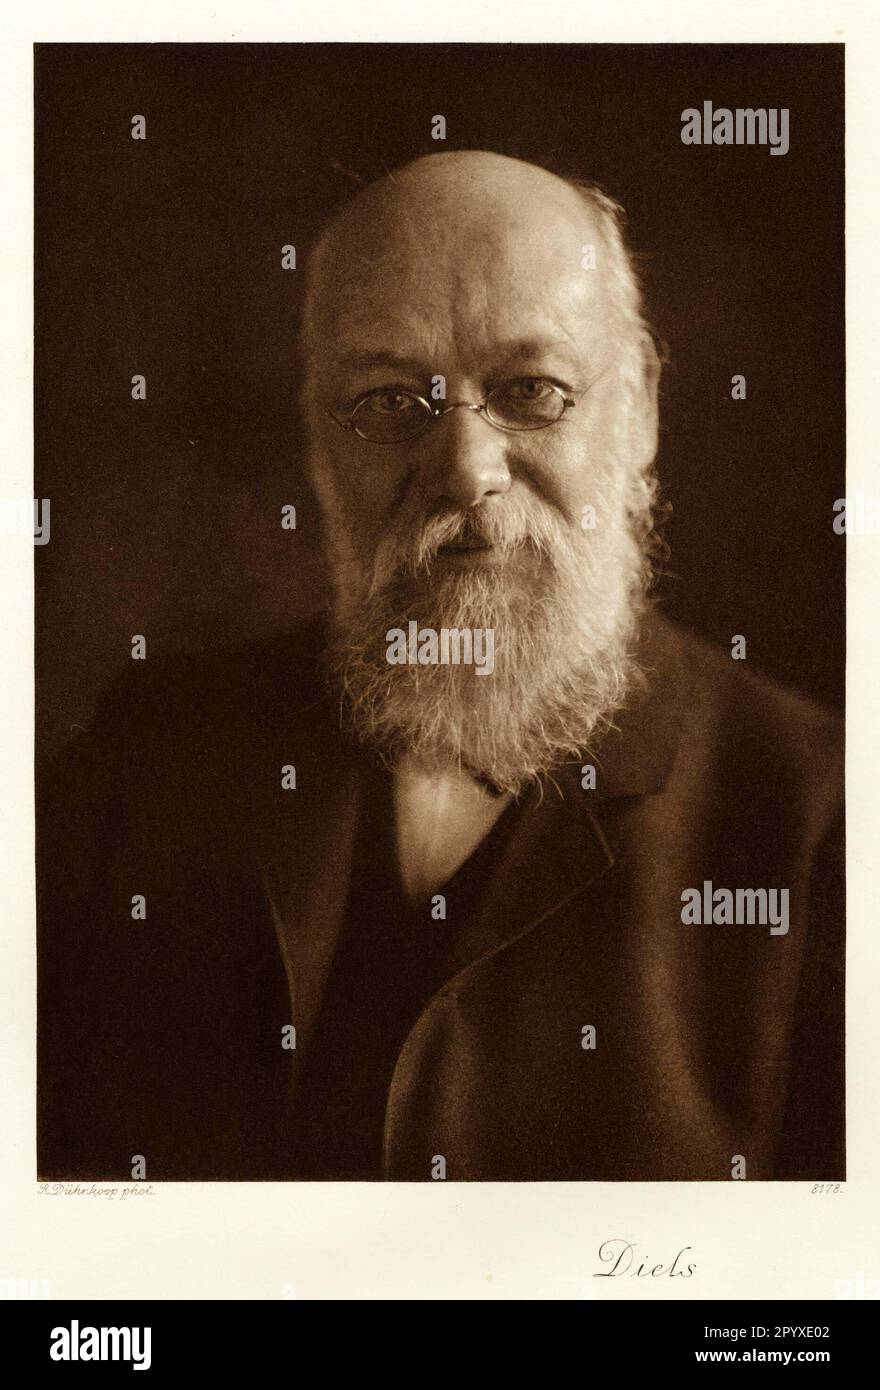 Hermann Diels (1848-1922), German classical philologist. Photograph by R. Dührkoop. Photo: Heliogravure, Corpus Imaginum, Hanfstaengl. collection (undated photograph). [automated translation] Stock Photo